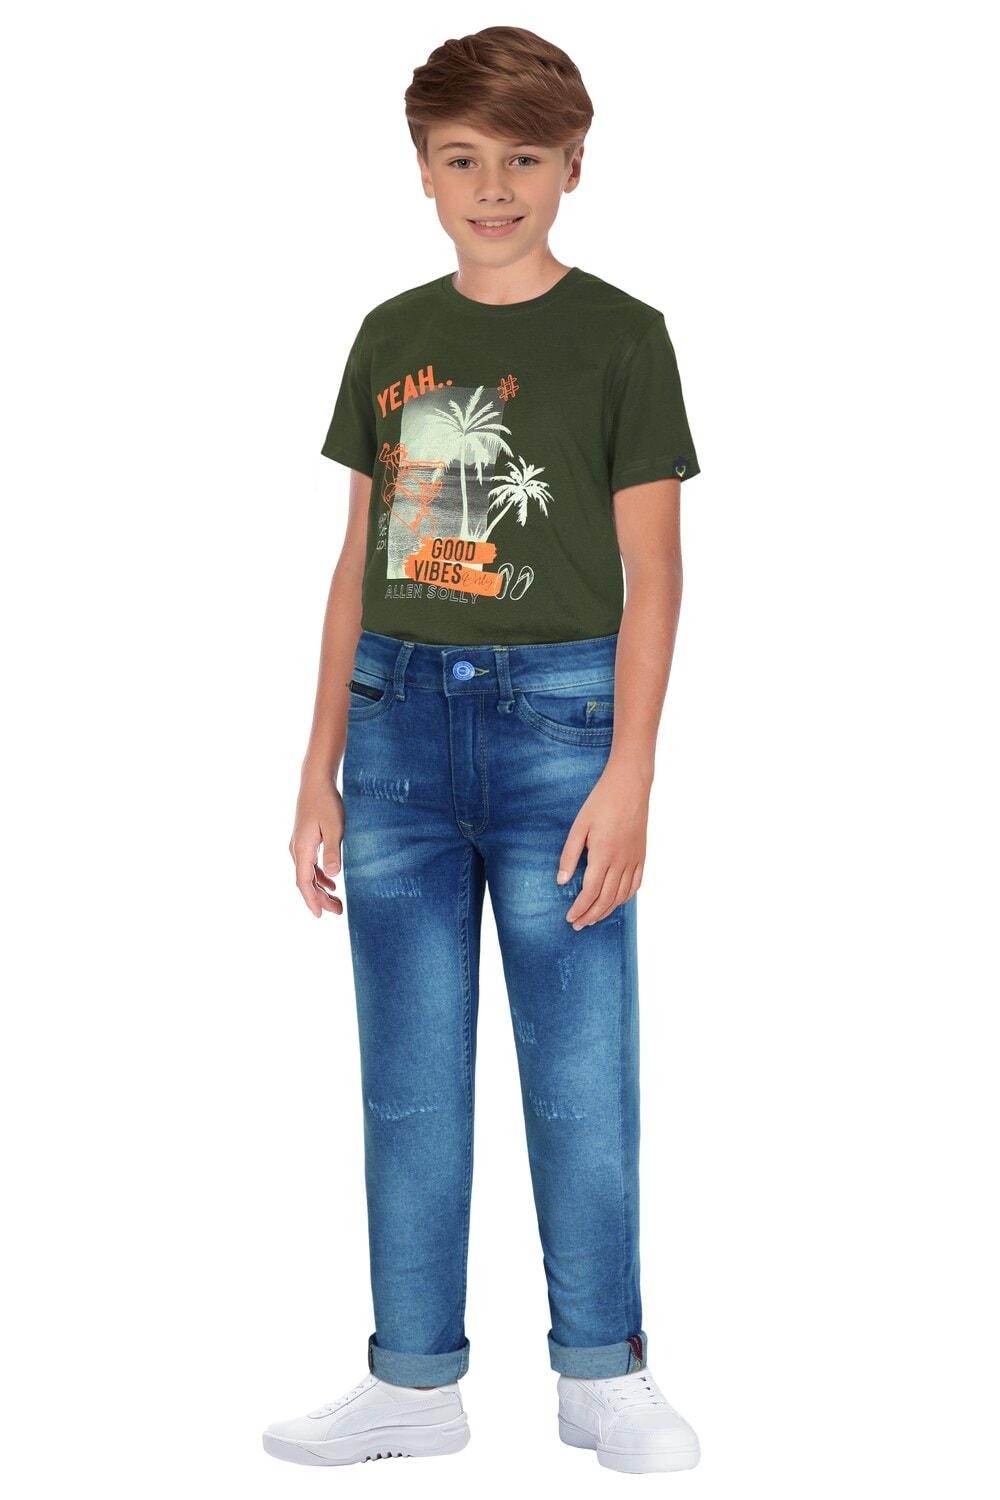 Blue Skinny Fit Jeans For Boys By Allen Solly